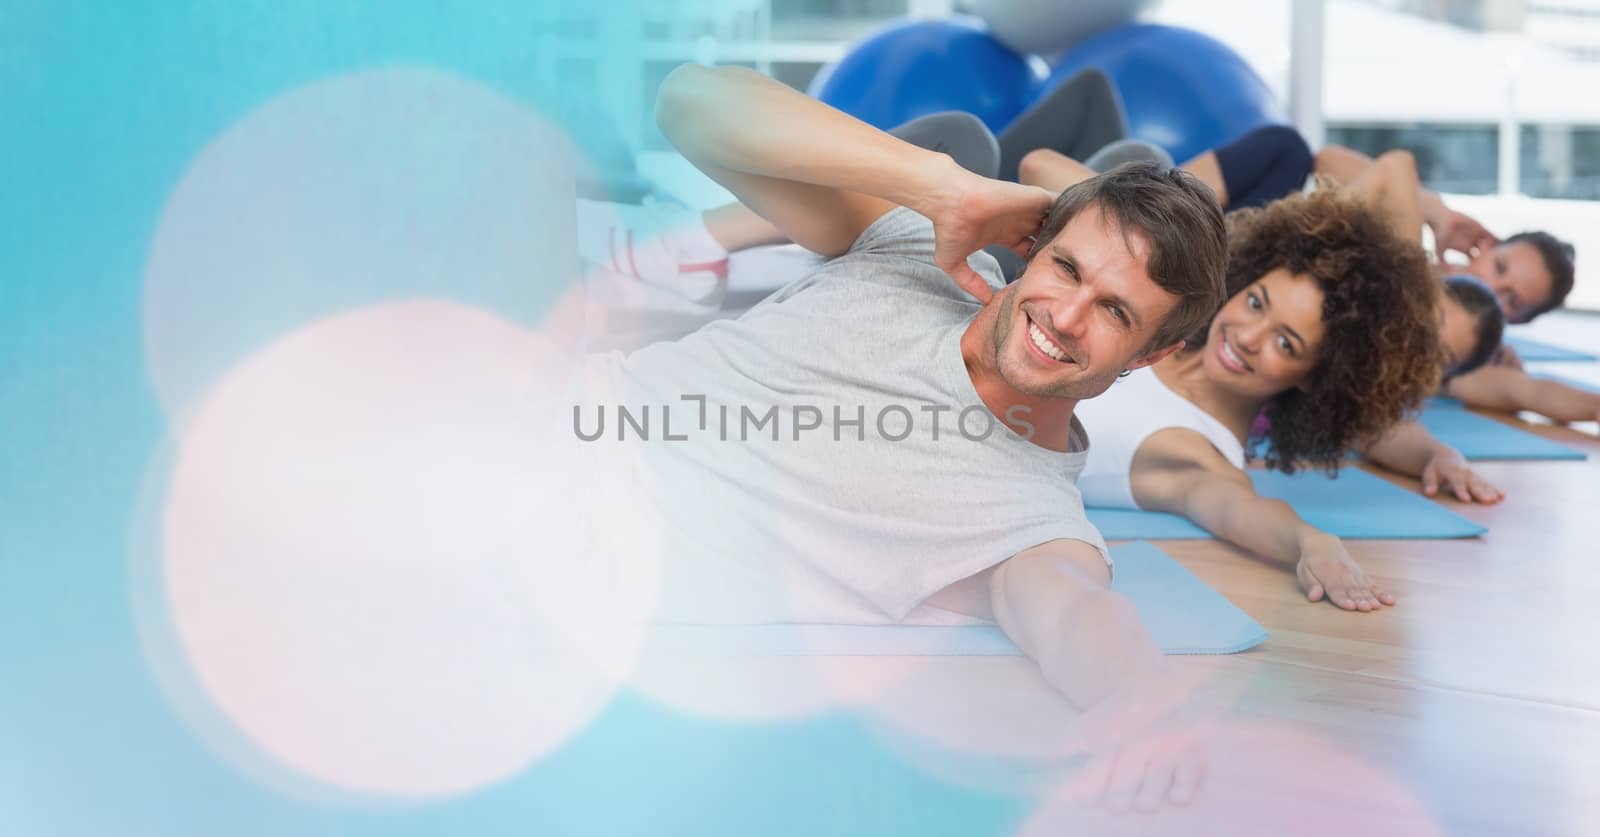 Digital composite of People on yoga matts and blue bokeh transition